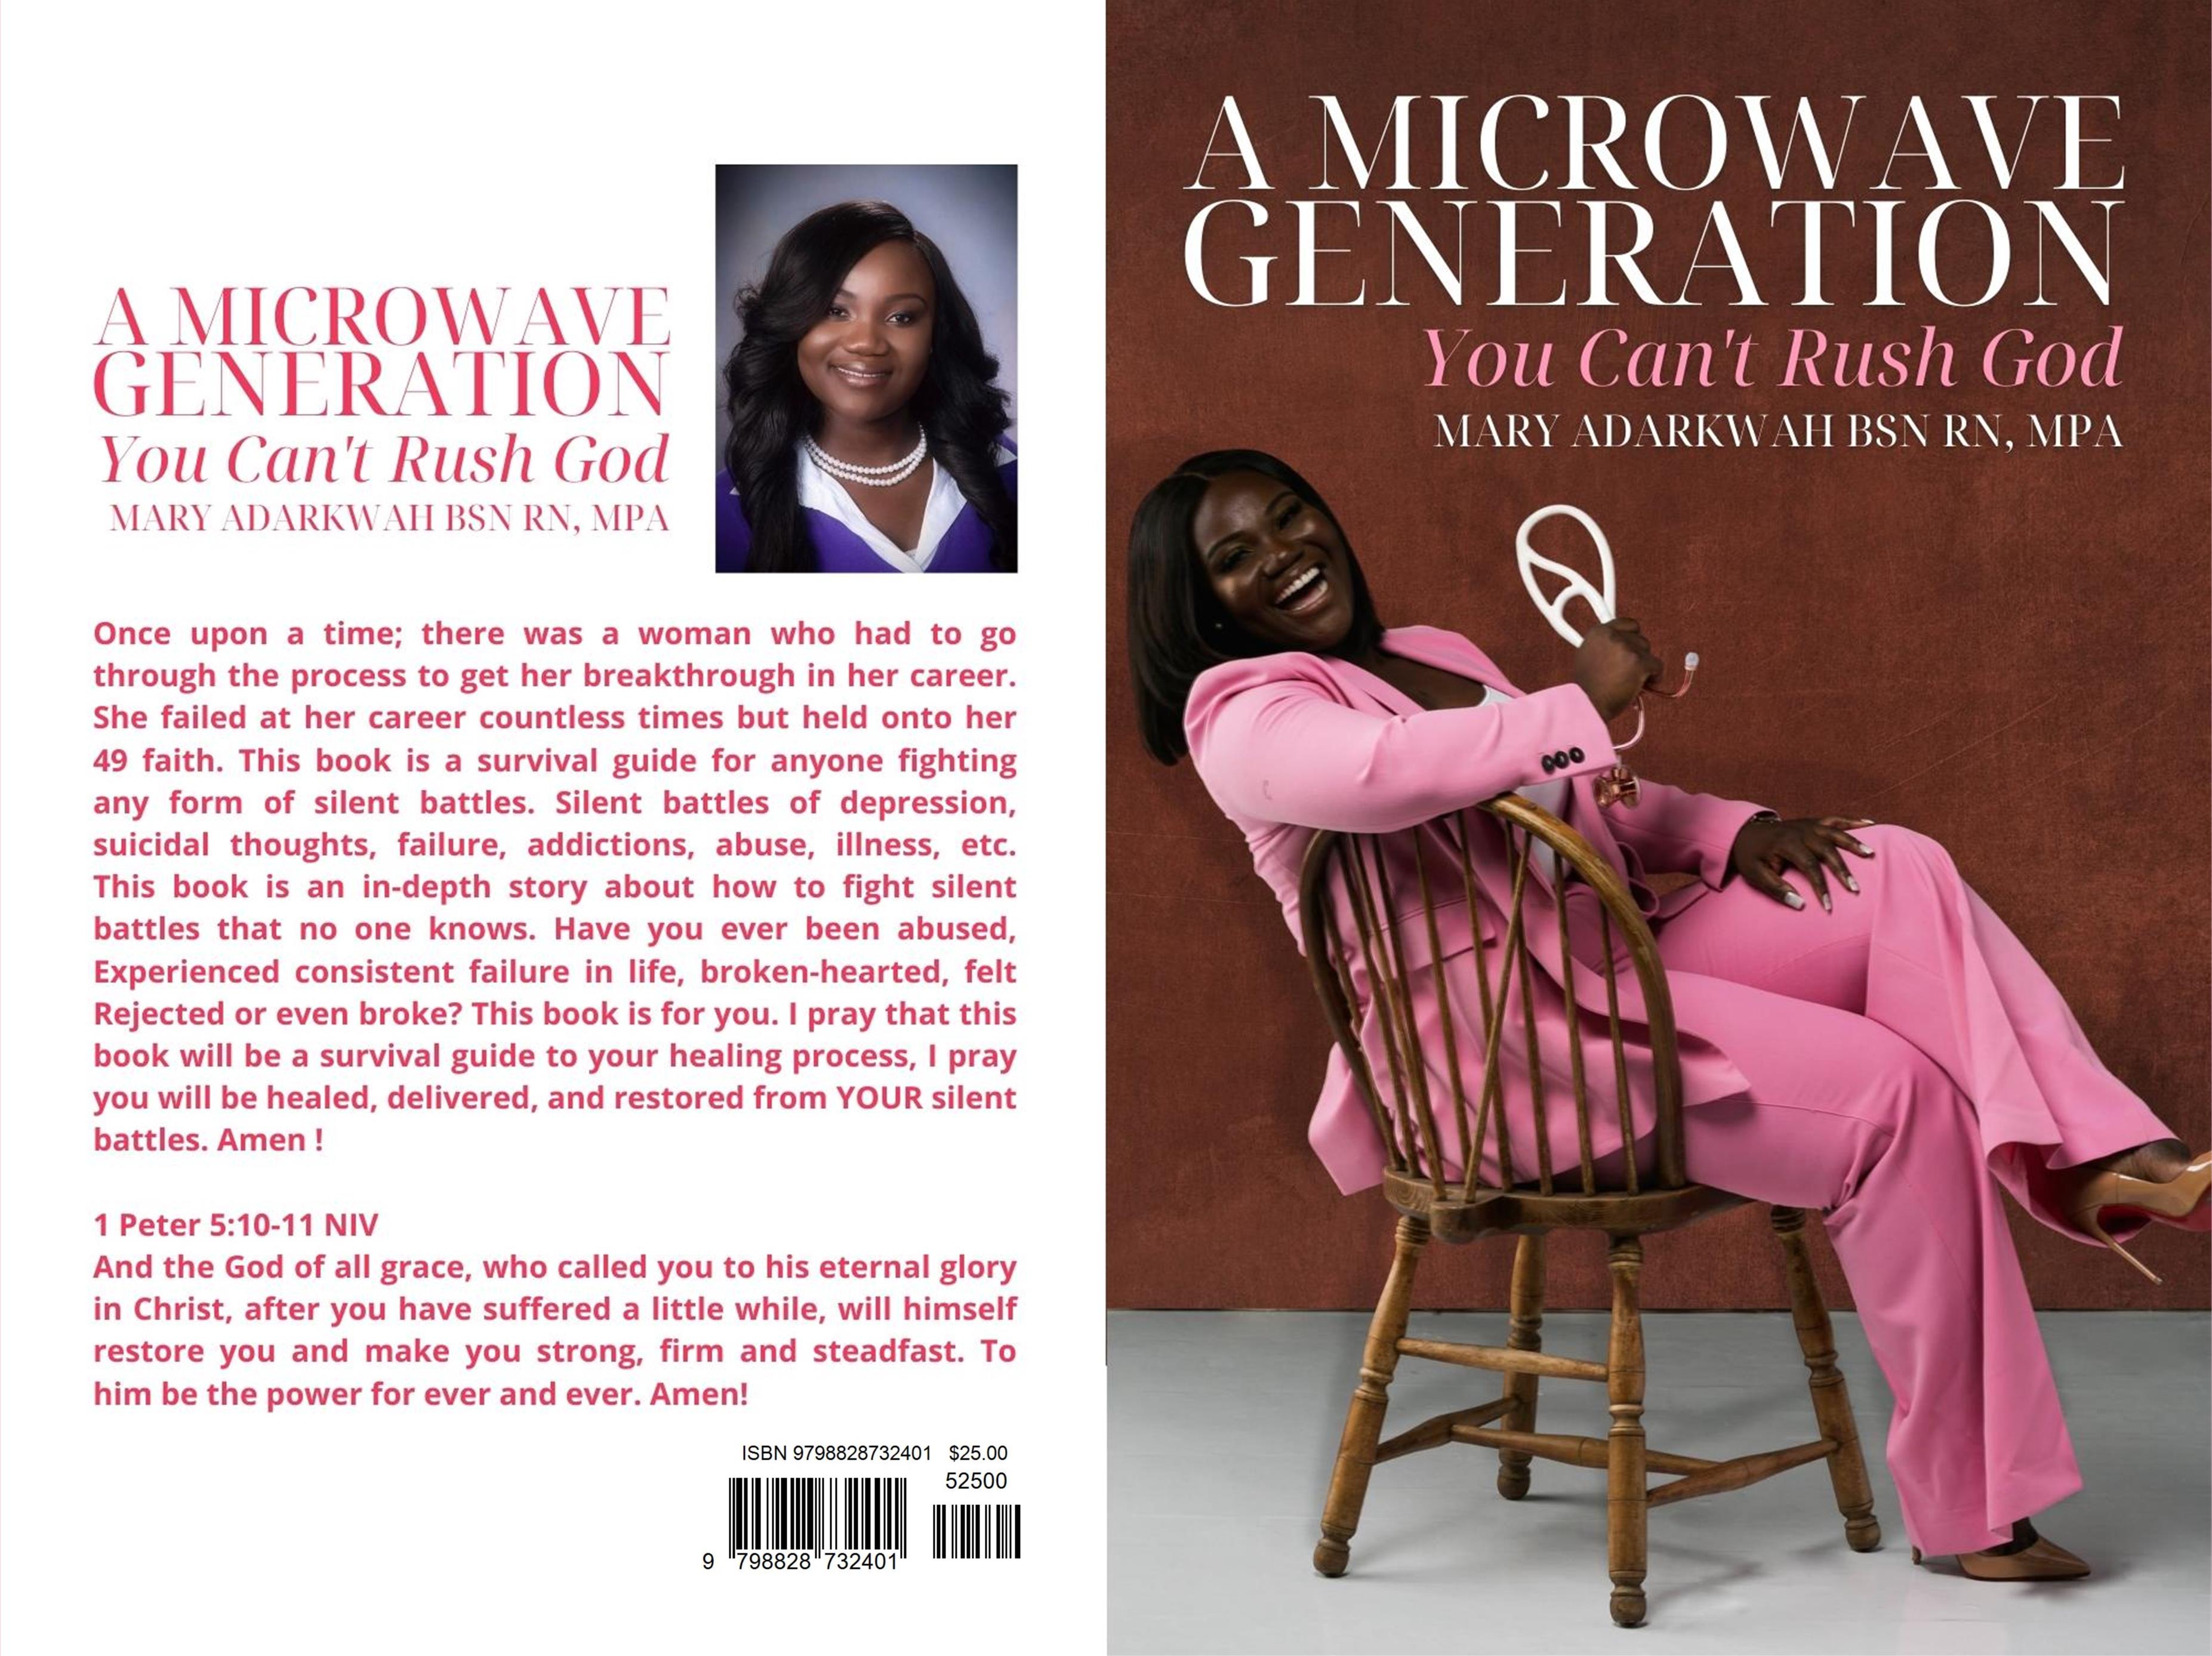 A MICROWAVE GENERATION, You Can